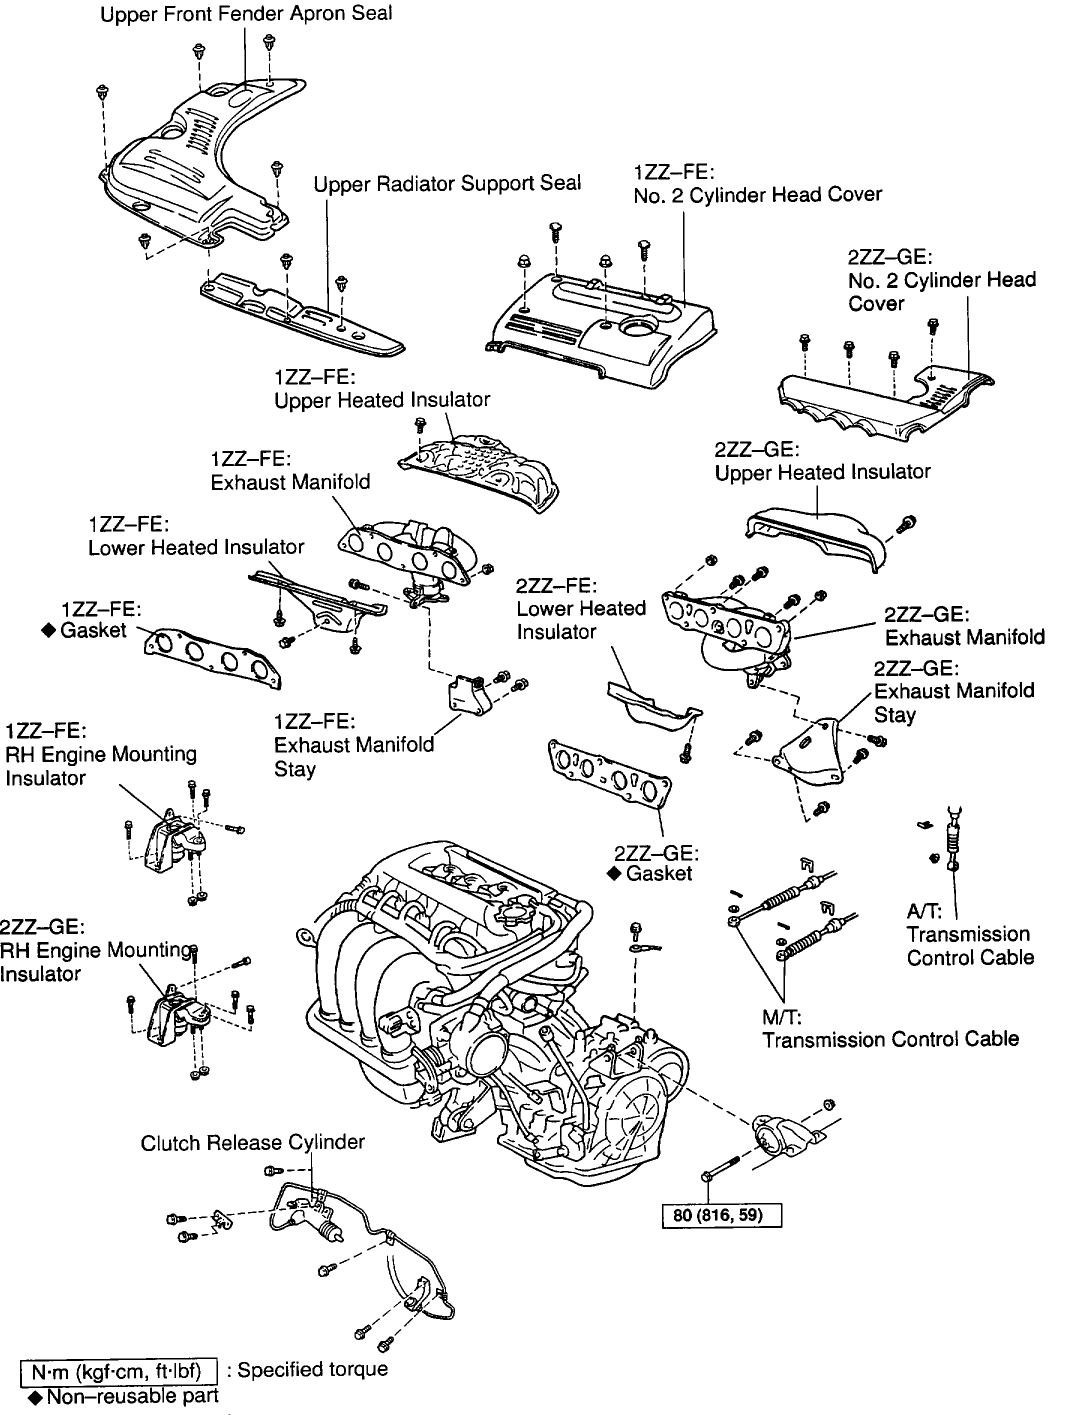 diagrams_engine_compartment4.gif